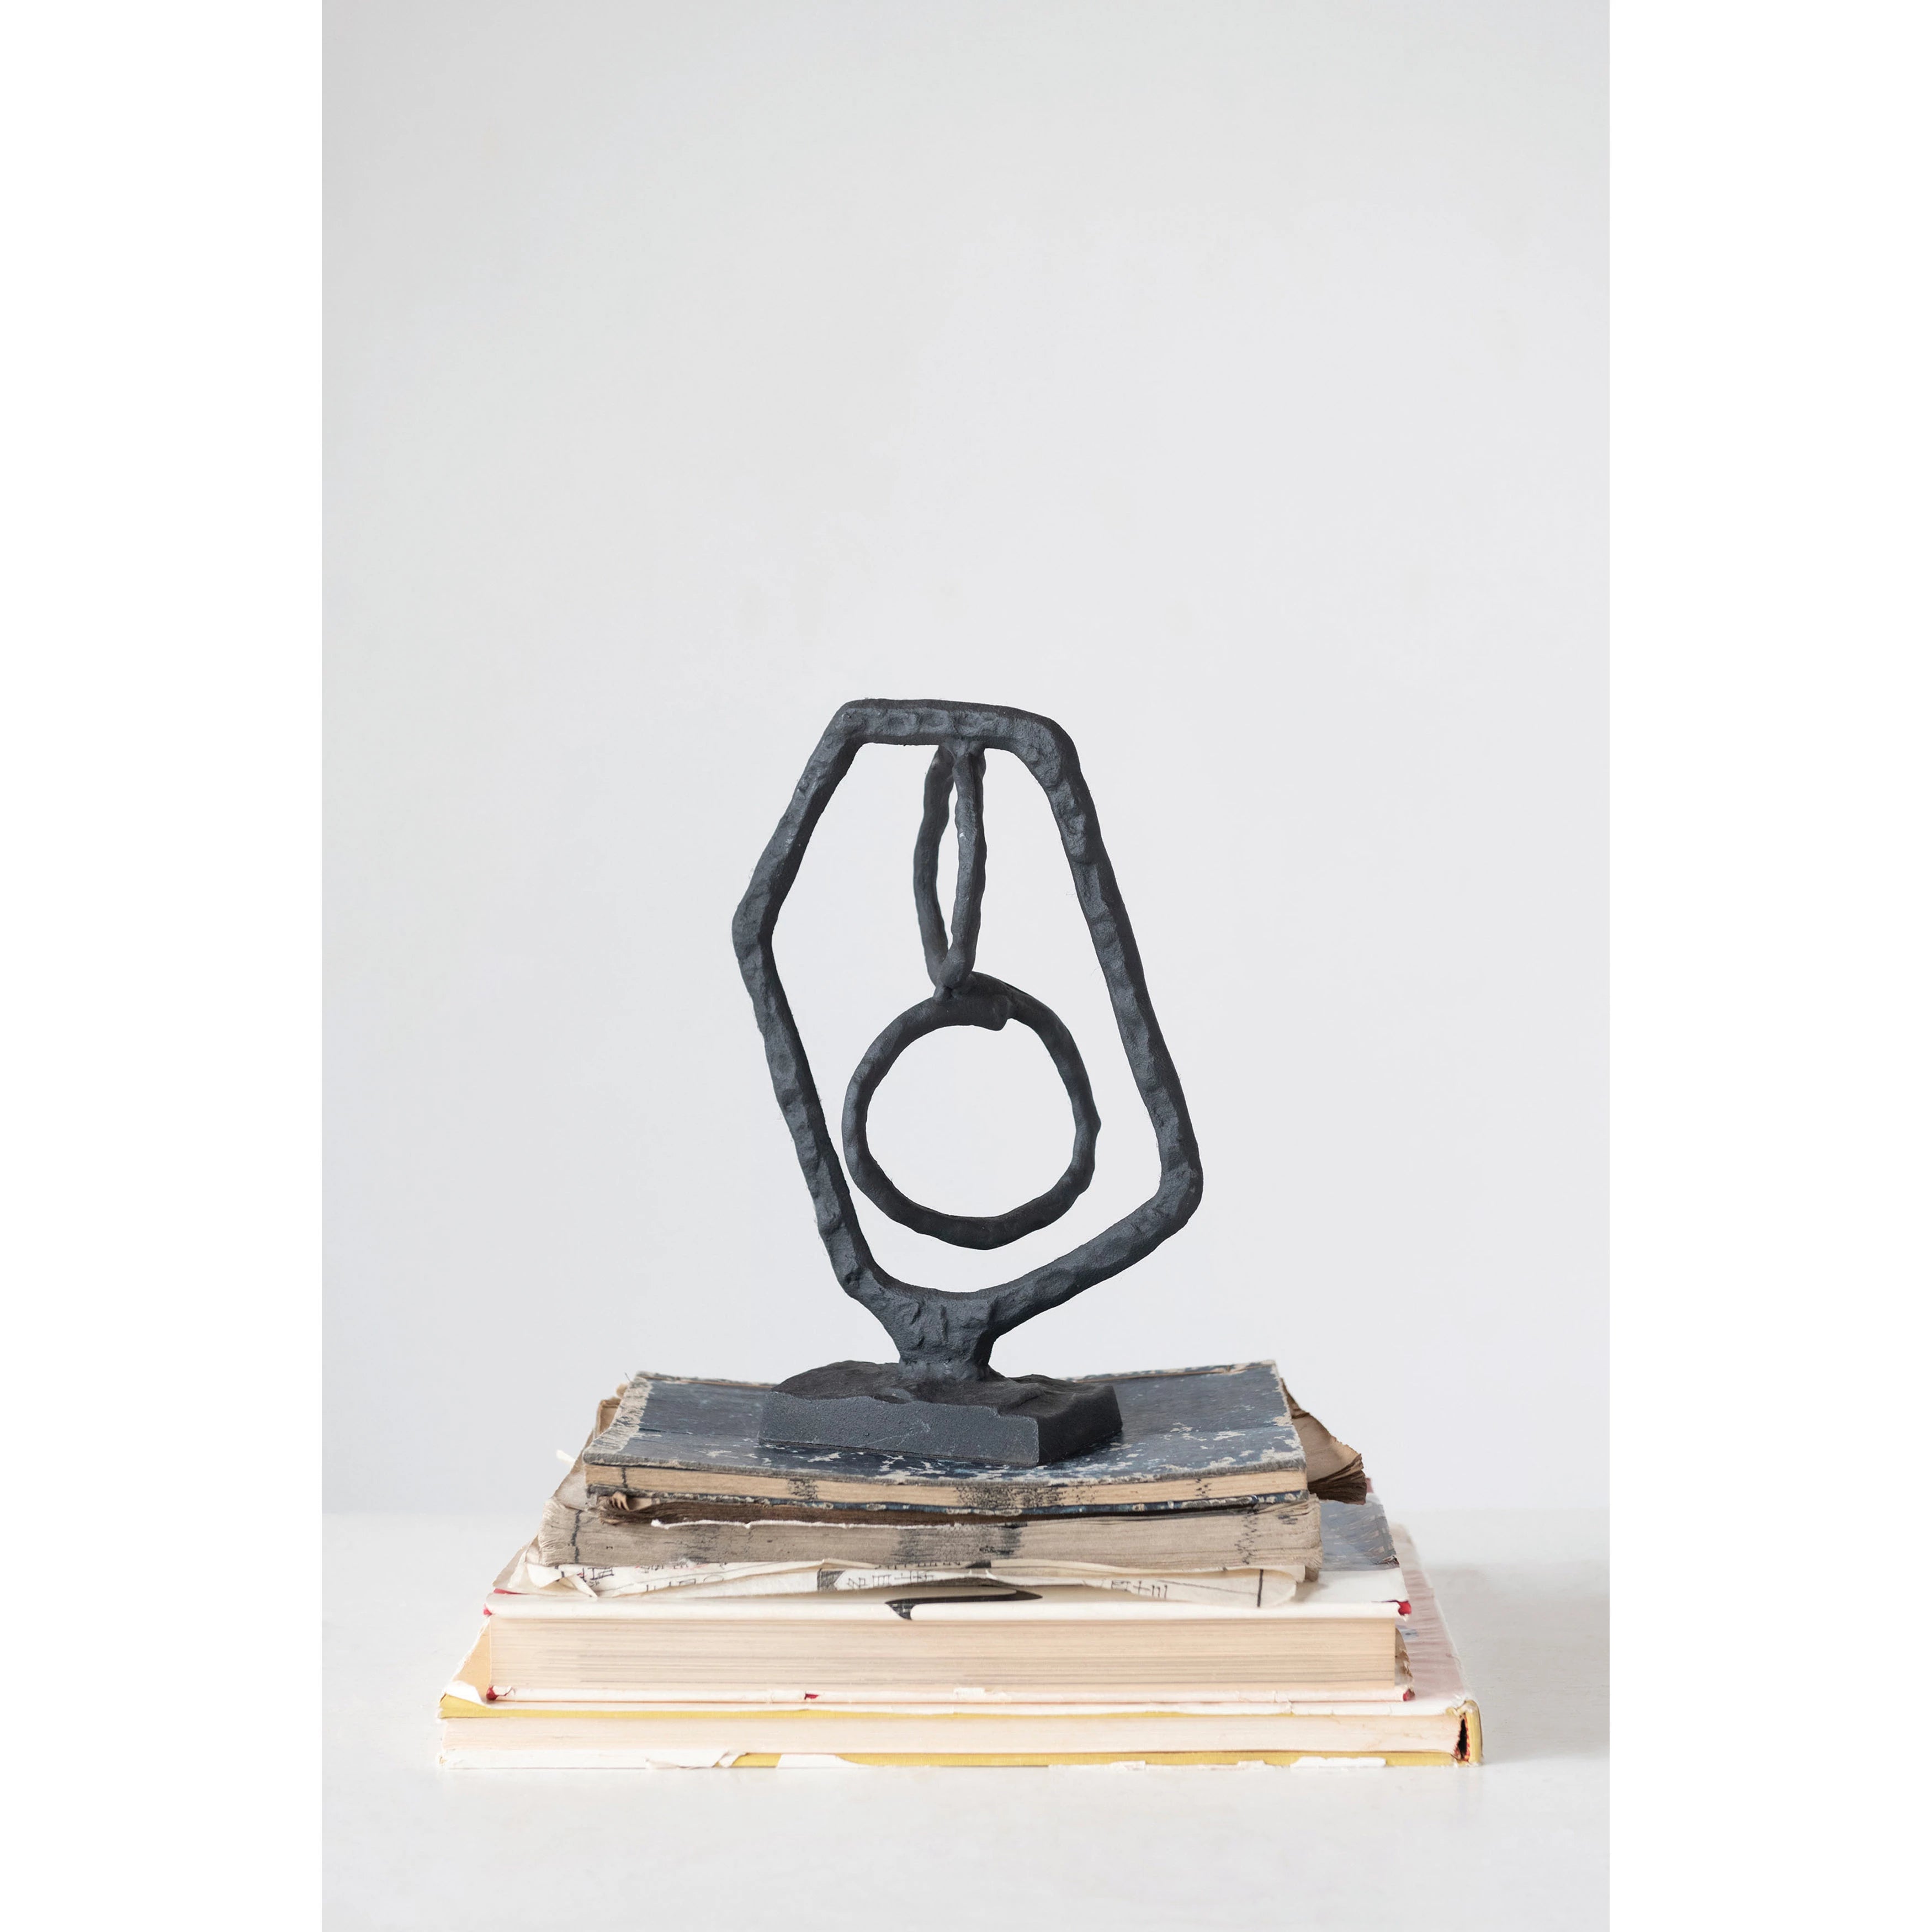 This Cast Iron Abstract Sculpture adds so much interest to any shelf, nook, or decorative area.   Size: 7.75"L x 2.75"W x 11"H